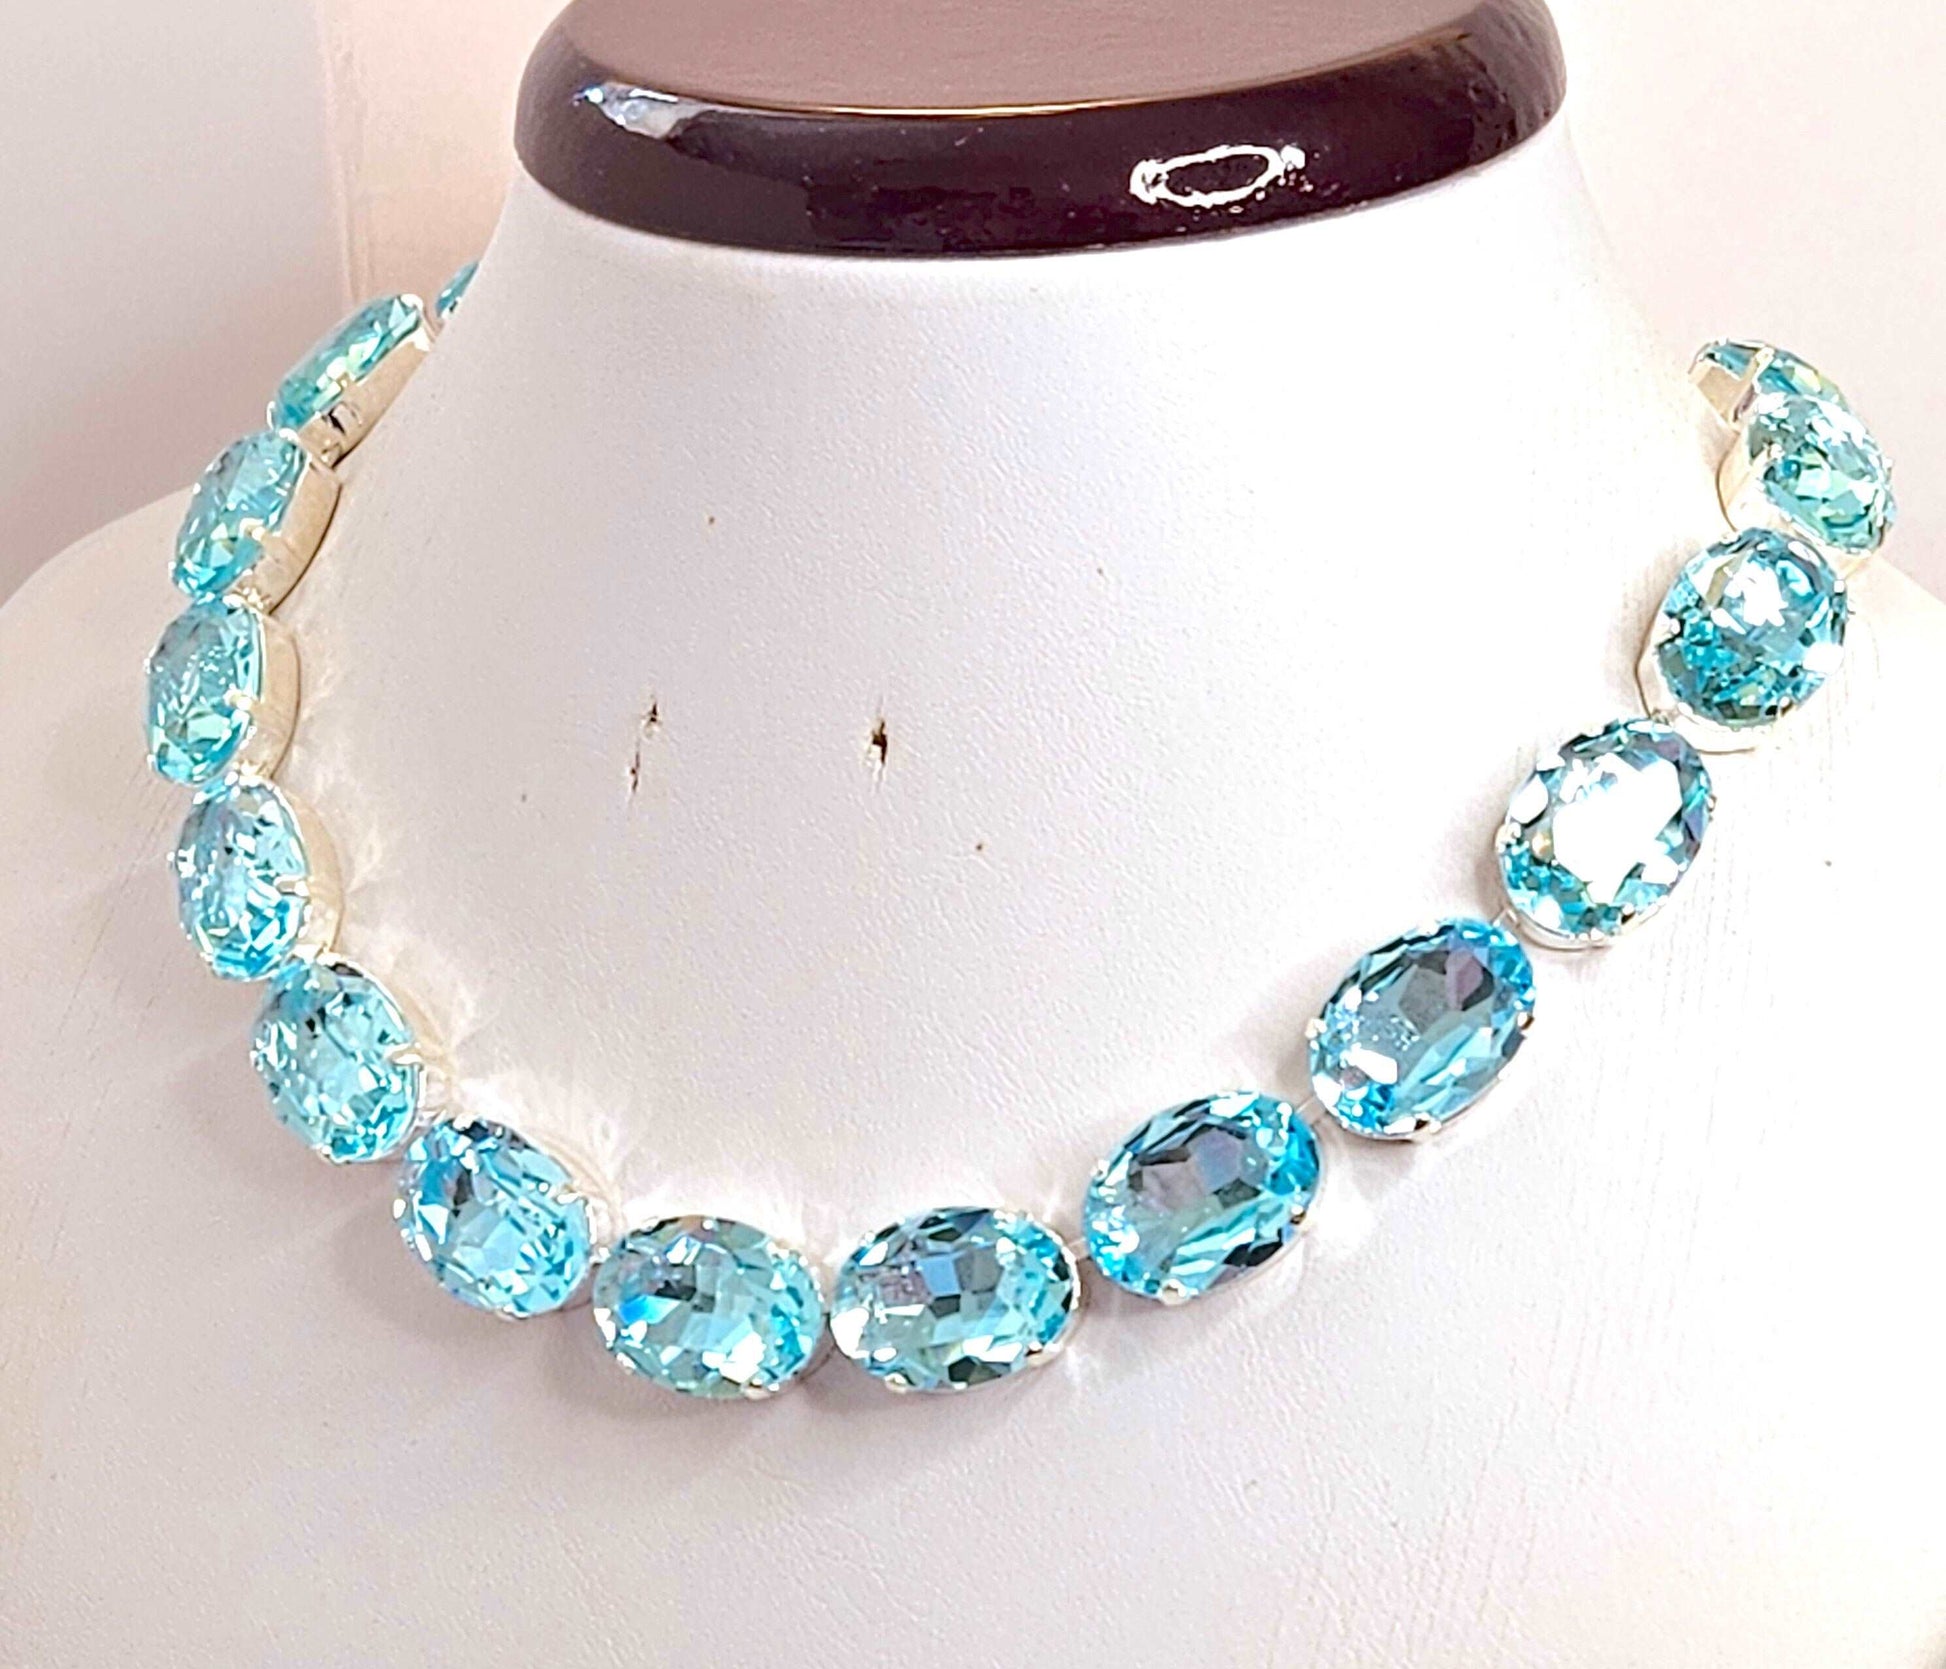 Aquamarine Sapphire Georgian Collet Necklaces, Crystal Chokers, Anna Wintour Style, Blue Riviere Necklace, Statement Necklace for Women